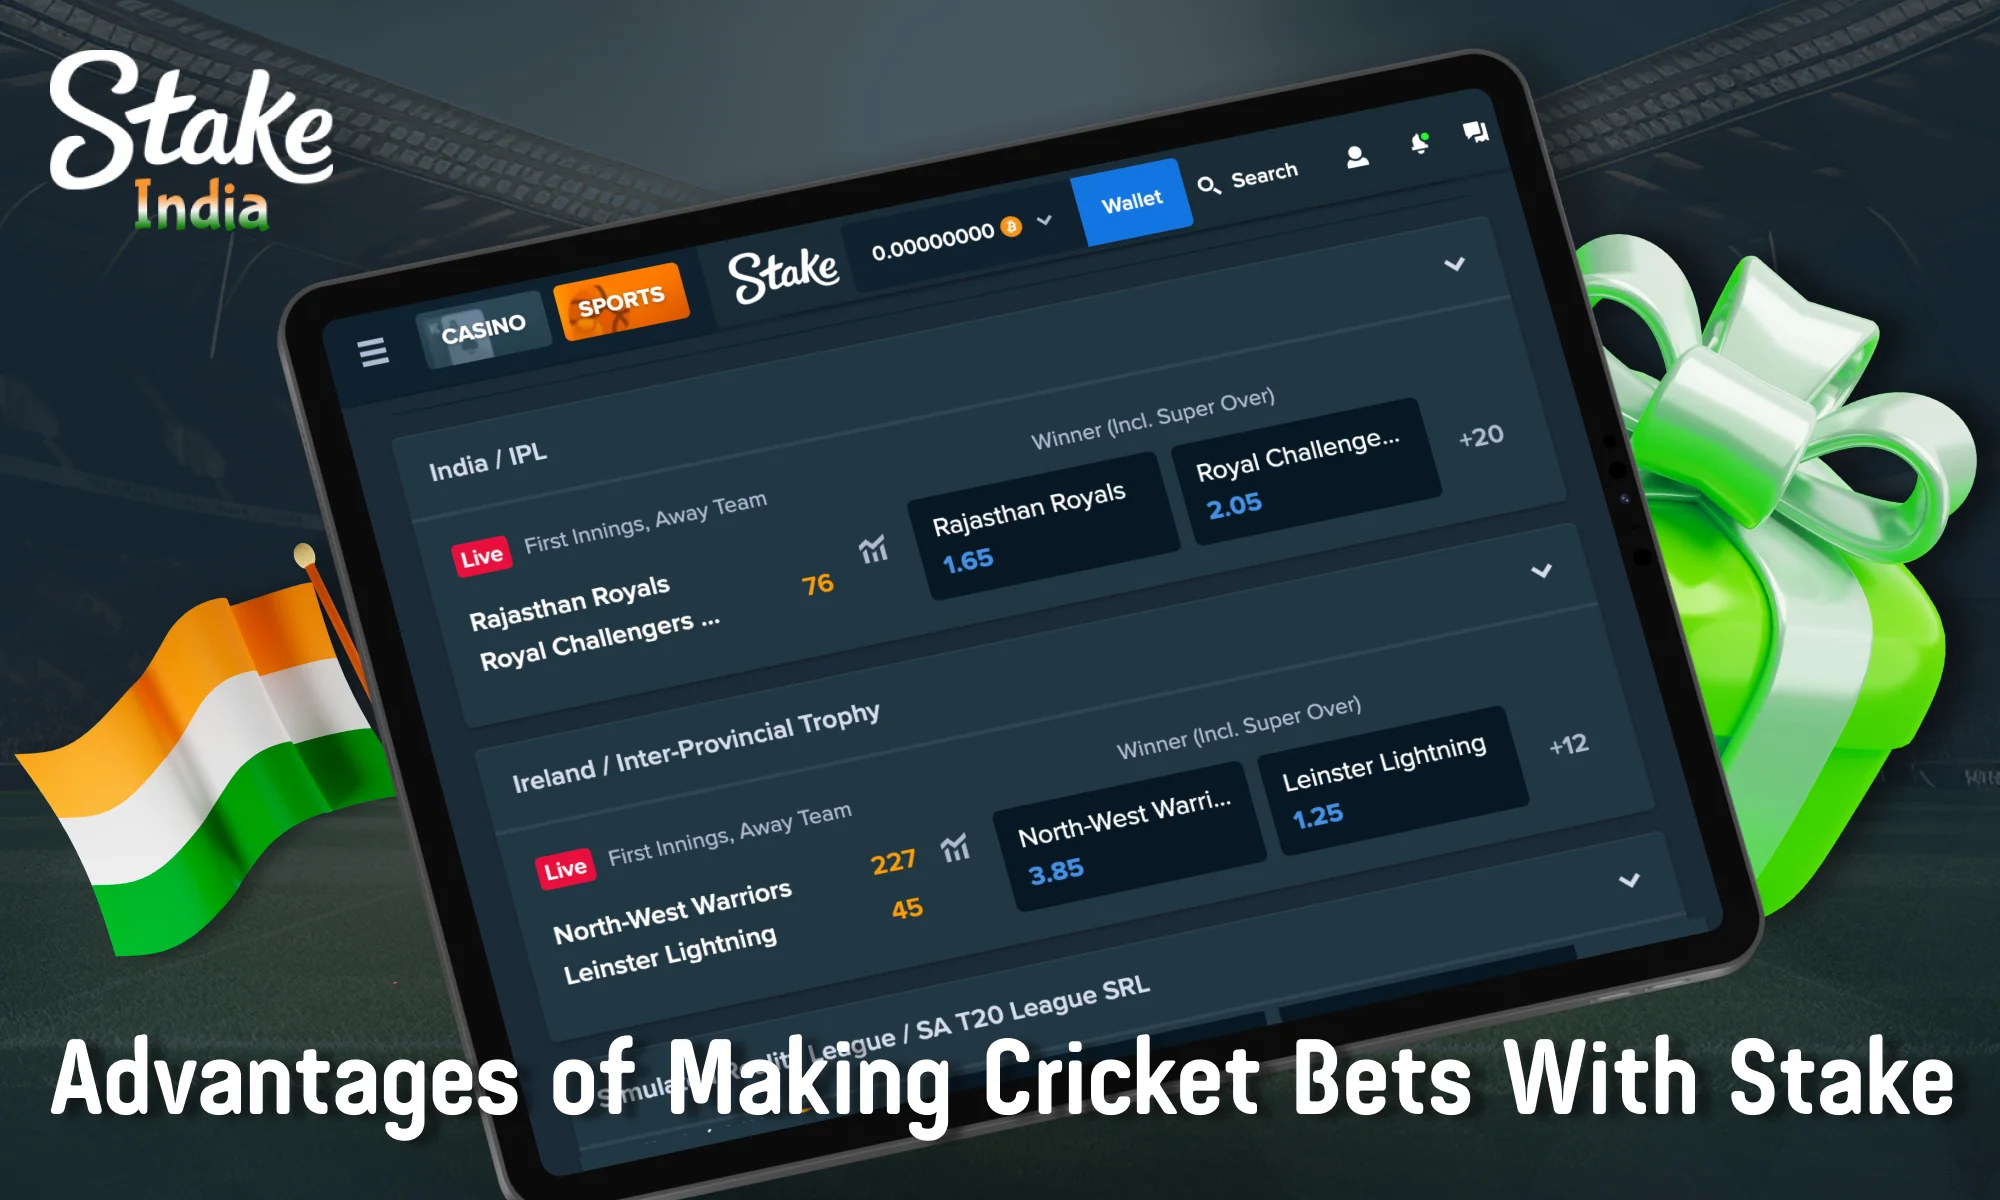 Stake advantages for Indian cricket bettors